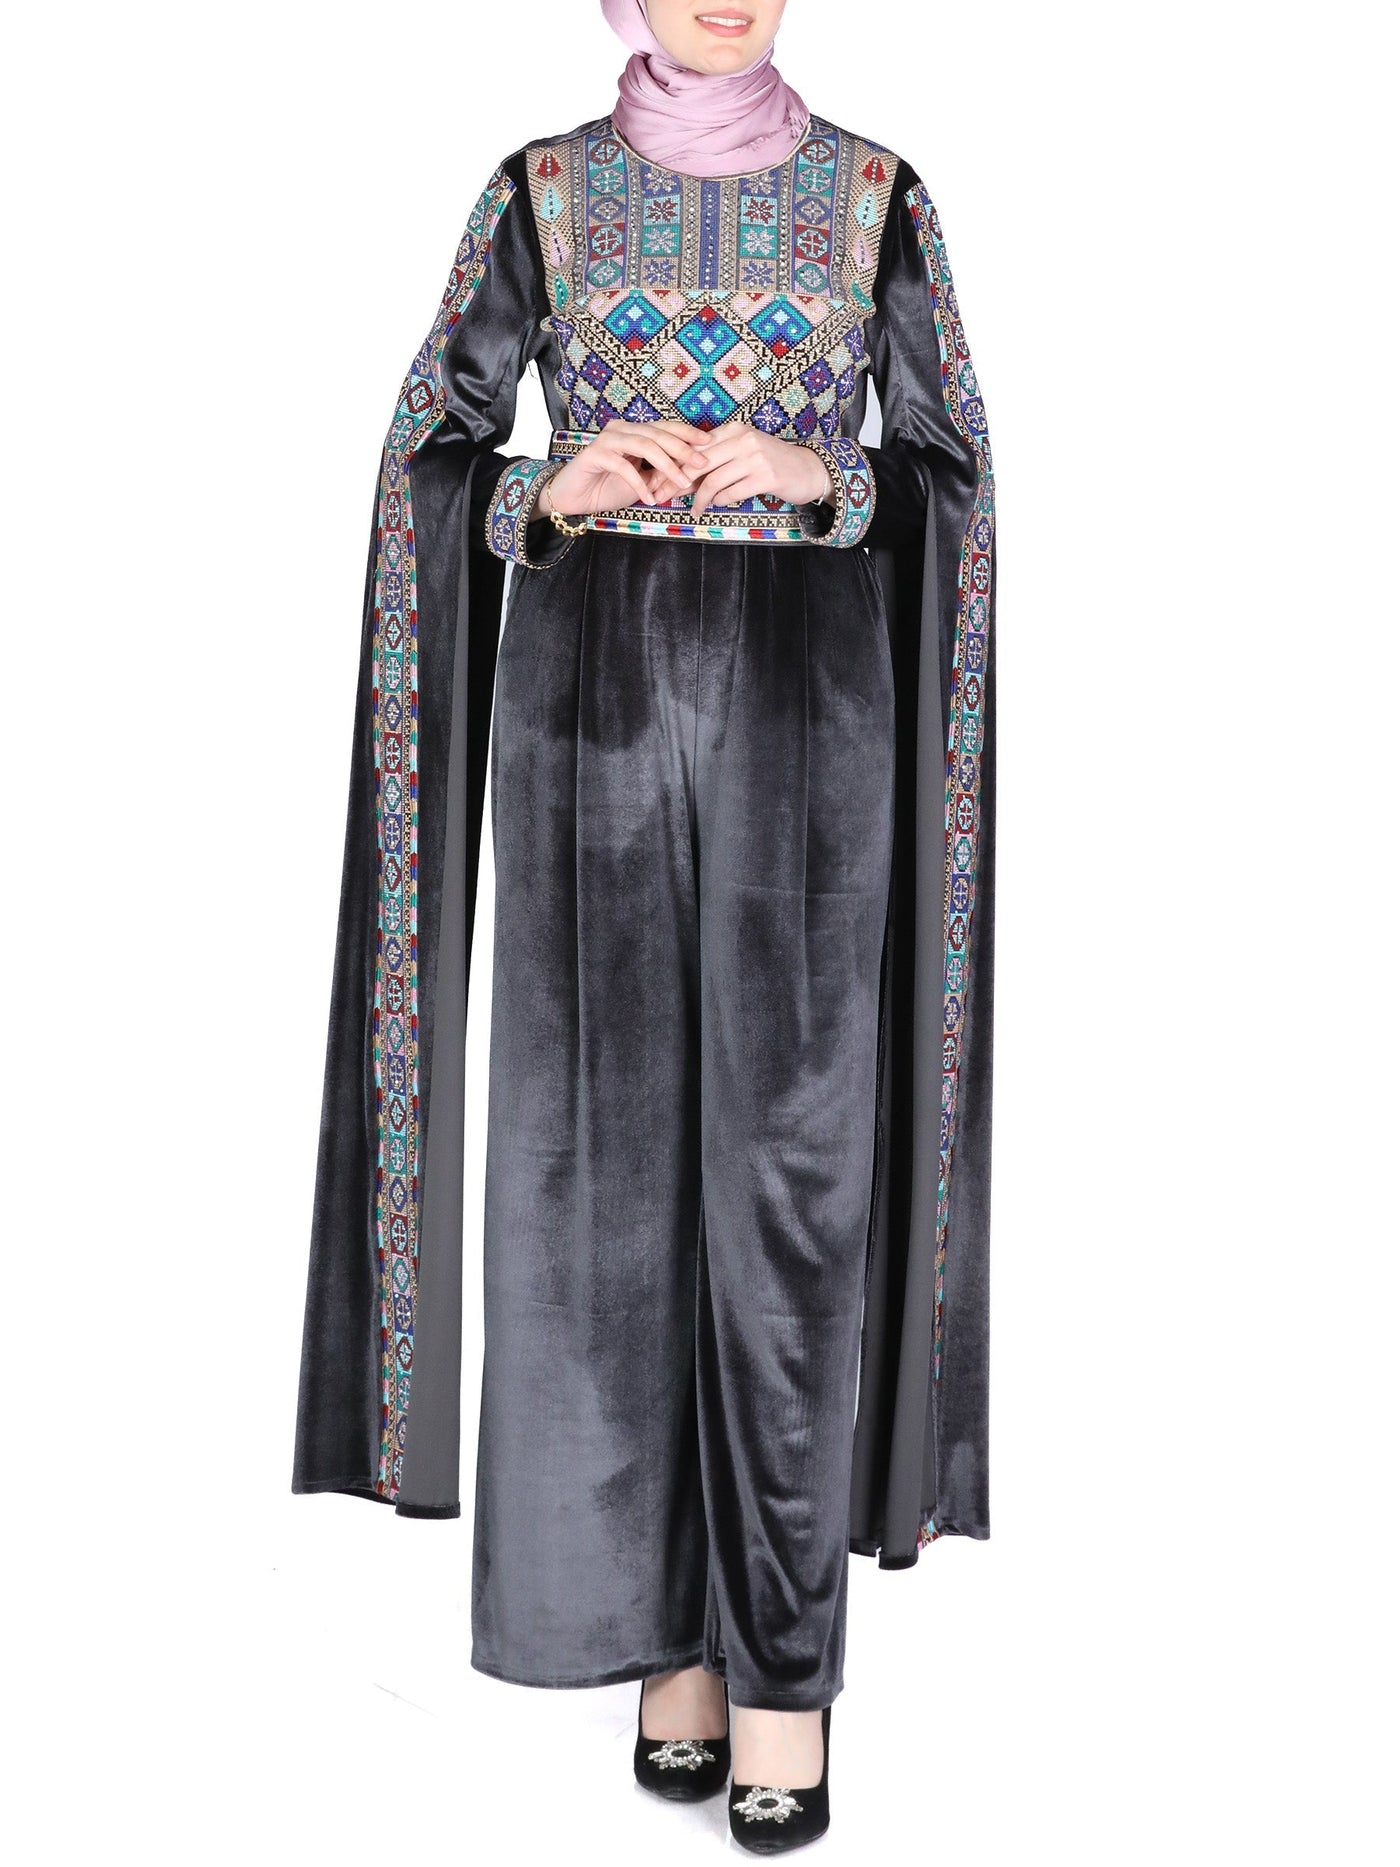 Embroidered Jumpsuit -High Quality Embroidered Palestinian style Jumpsuit